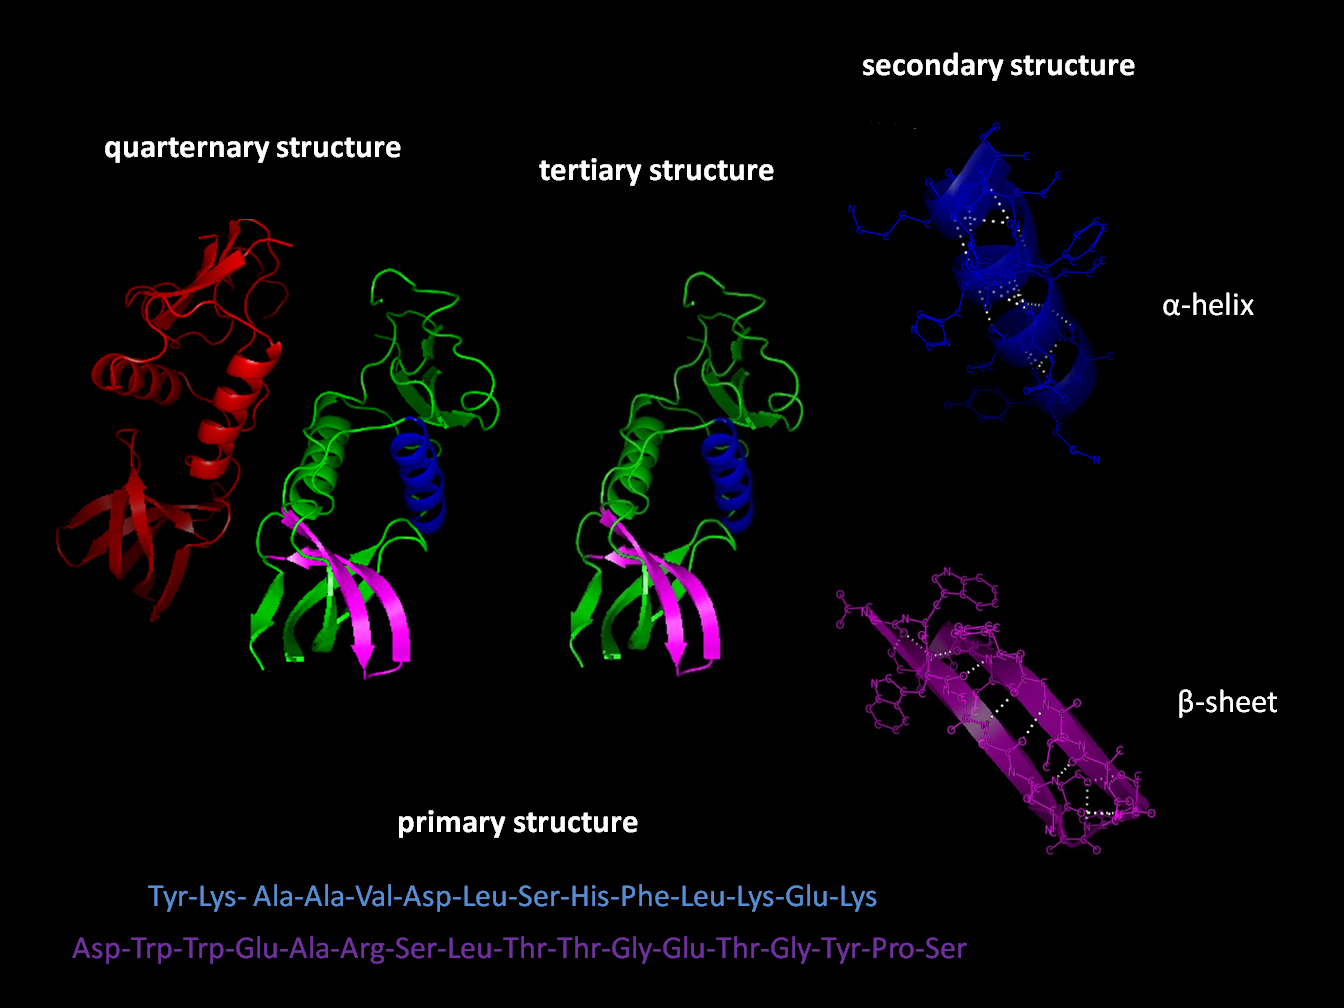 The amino-acid sequence, the primary structure of a protein, determines the secondary (α-helix and β-sheet), tertiary and quaternary protein structures